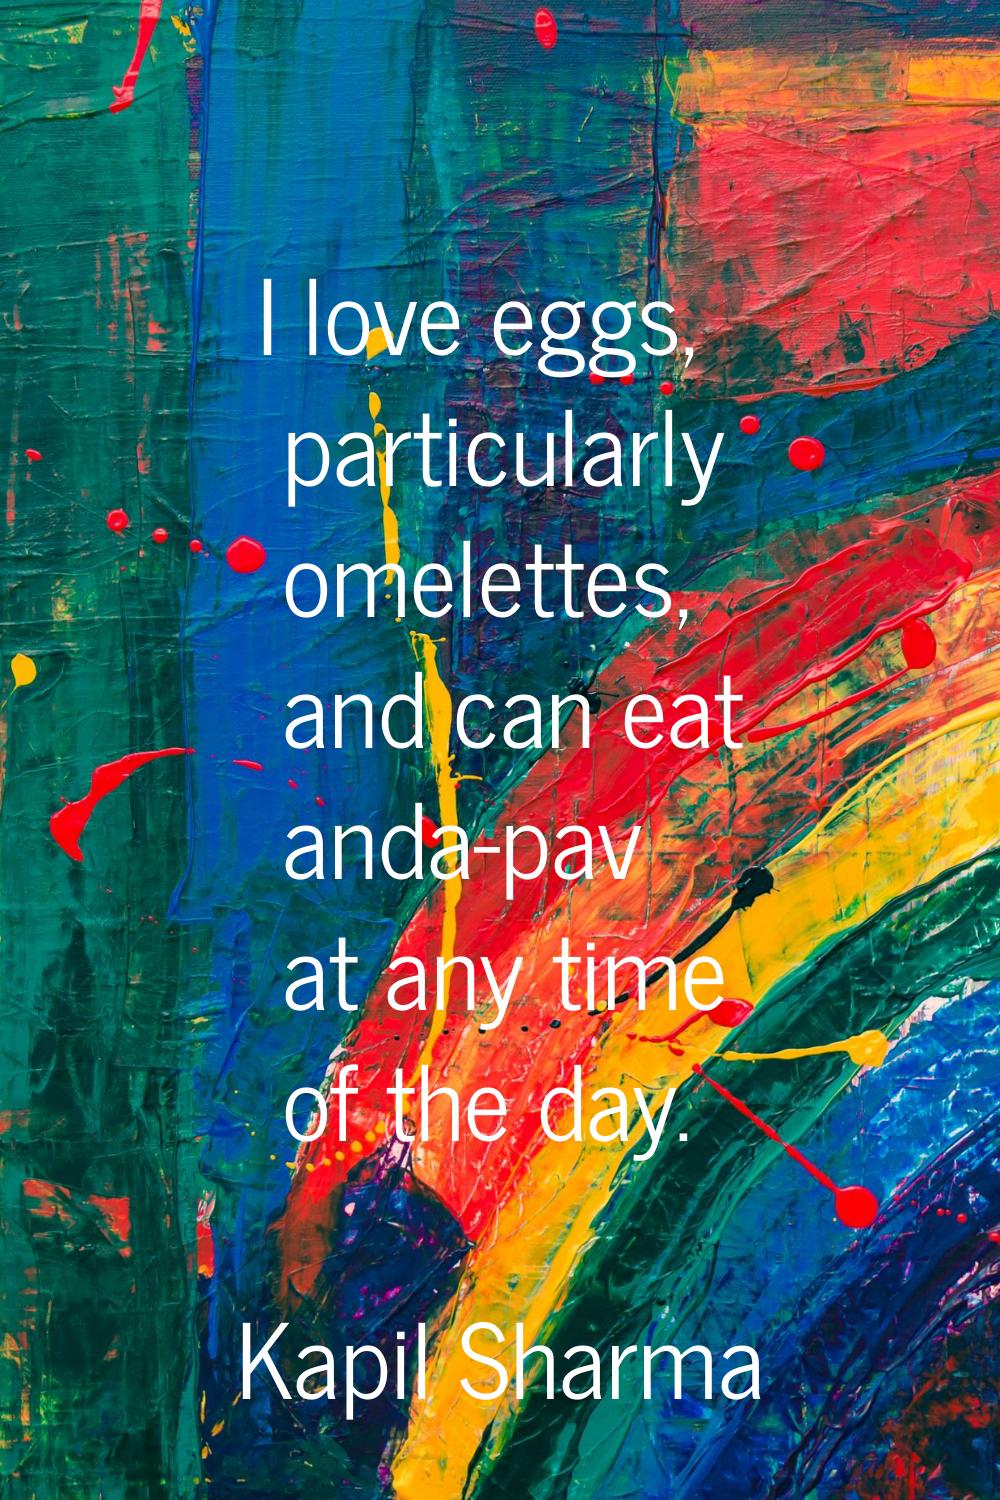 I love eggs, particularly omelettes, and can eat anda-pav at any time of the day.